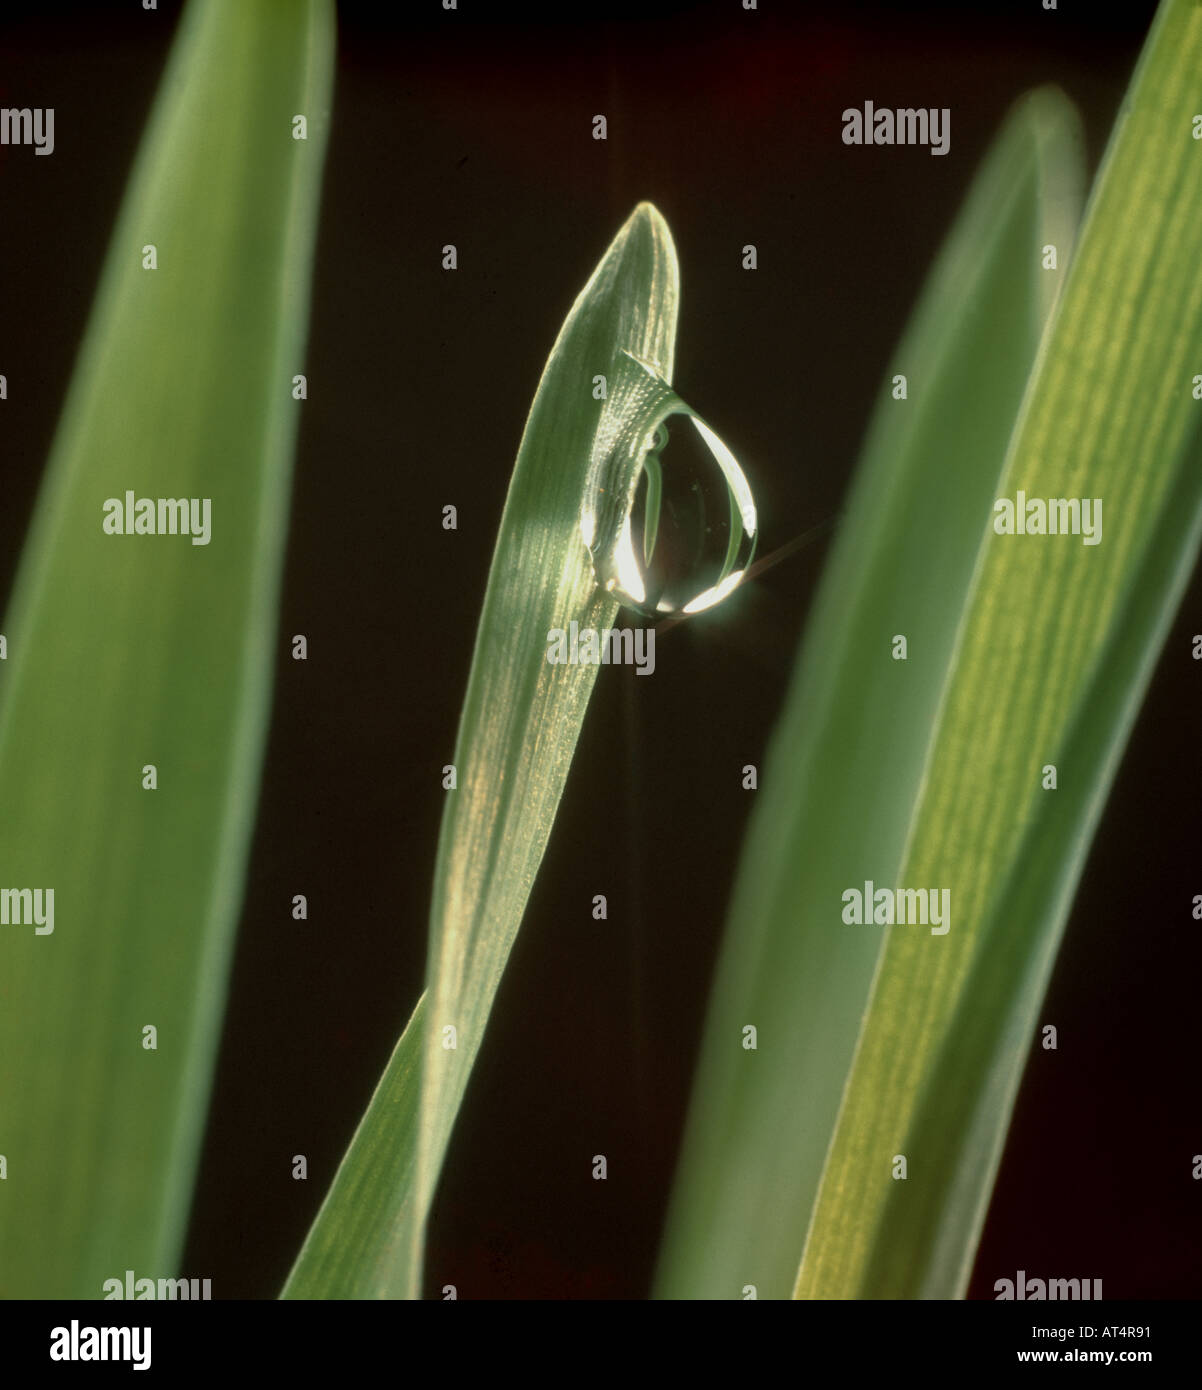 A droplet of water on a barley leaf Stock Photo